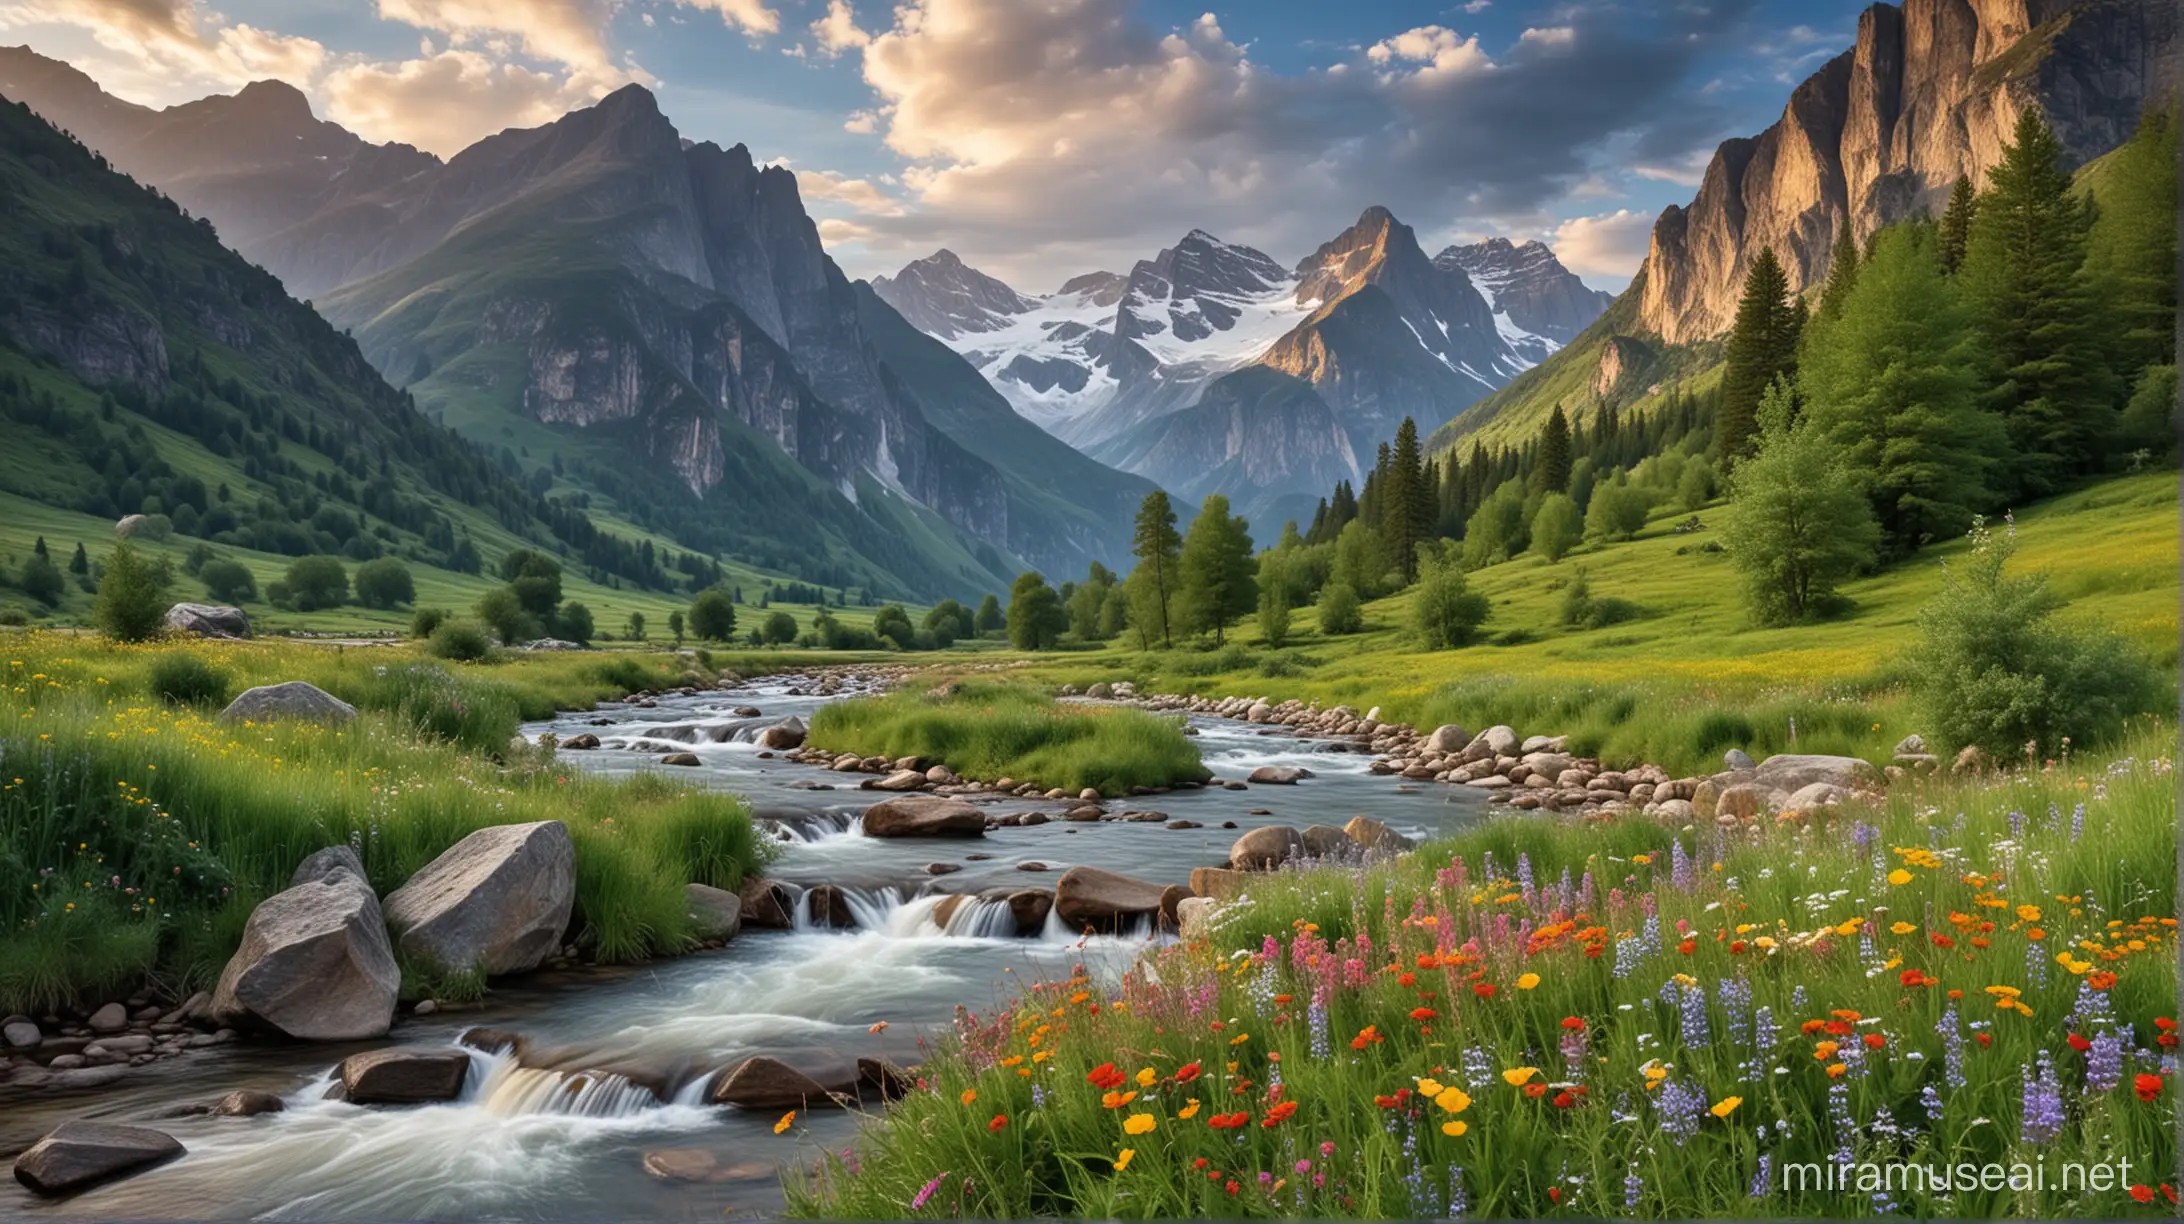 Imagine/ beautiful landscape, mountains, River side,trees,clear sky with fewer clouds,peaceful place,wild flowers,ideal place to live